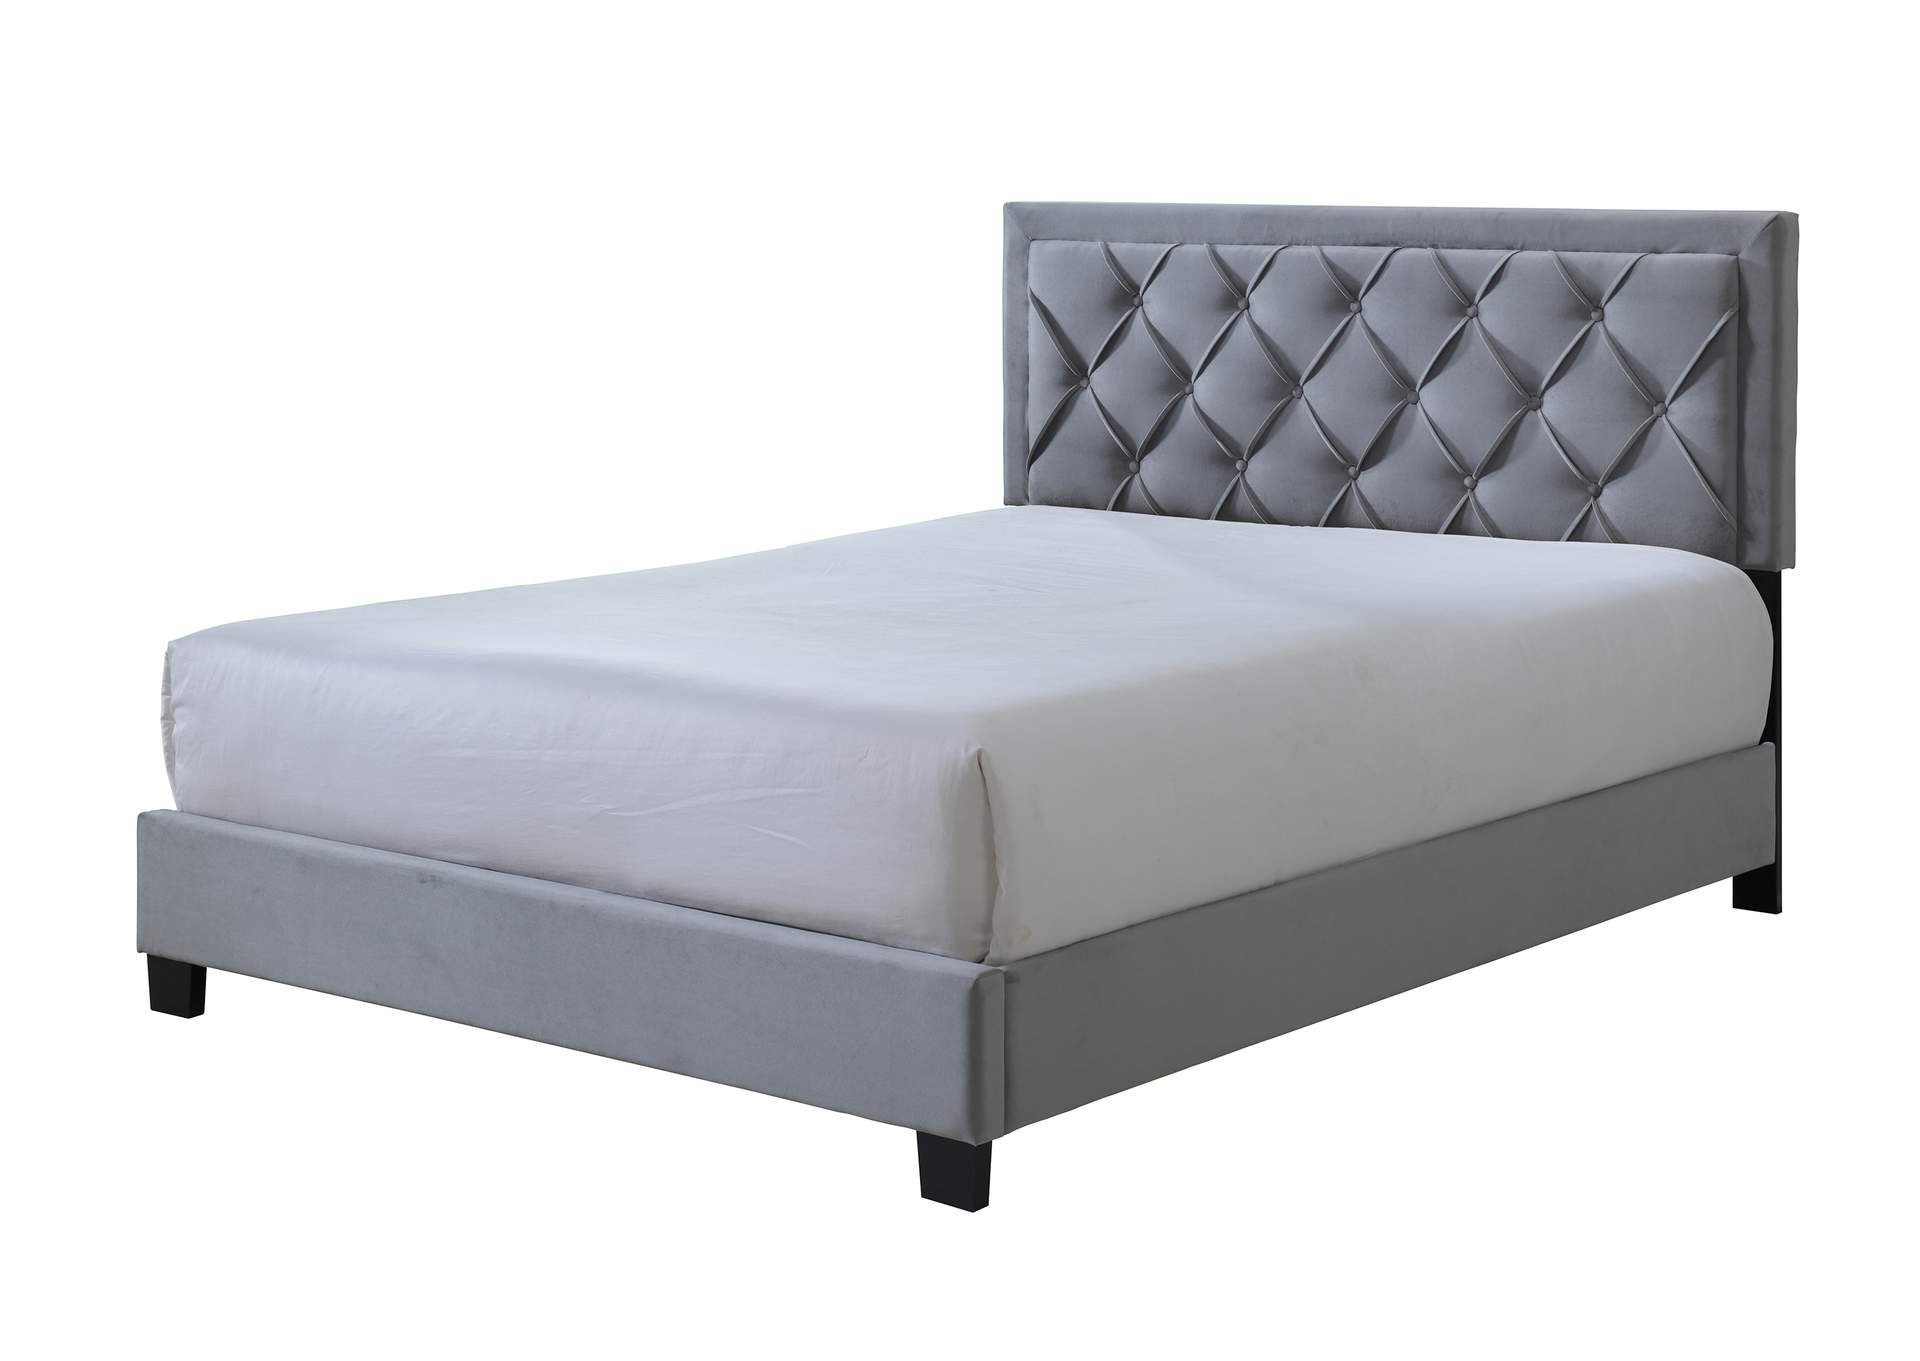 Danzy King Bed,Crown Mark